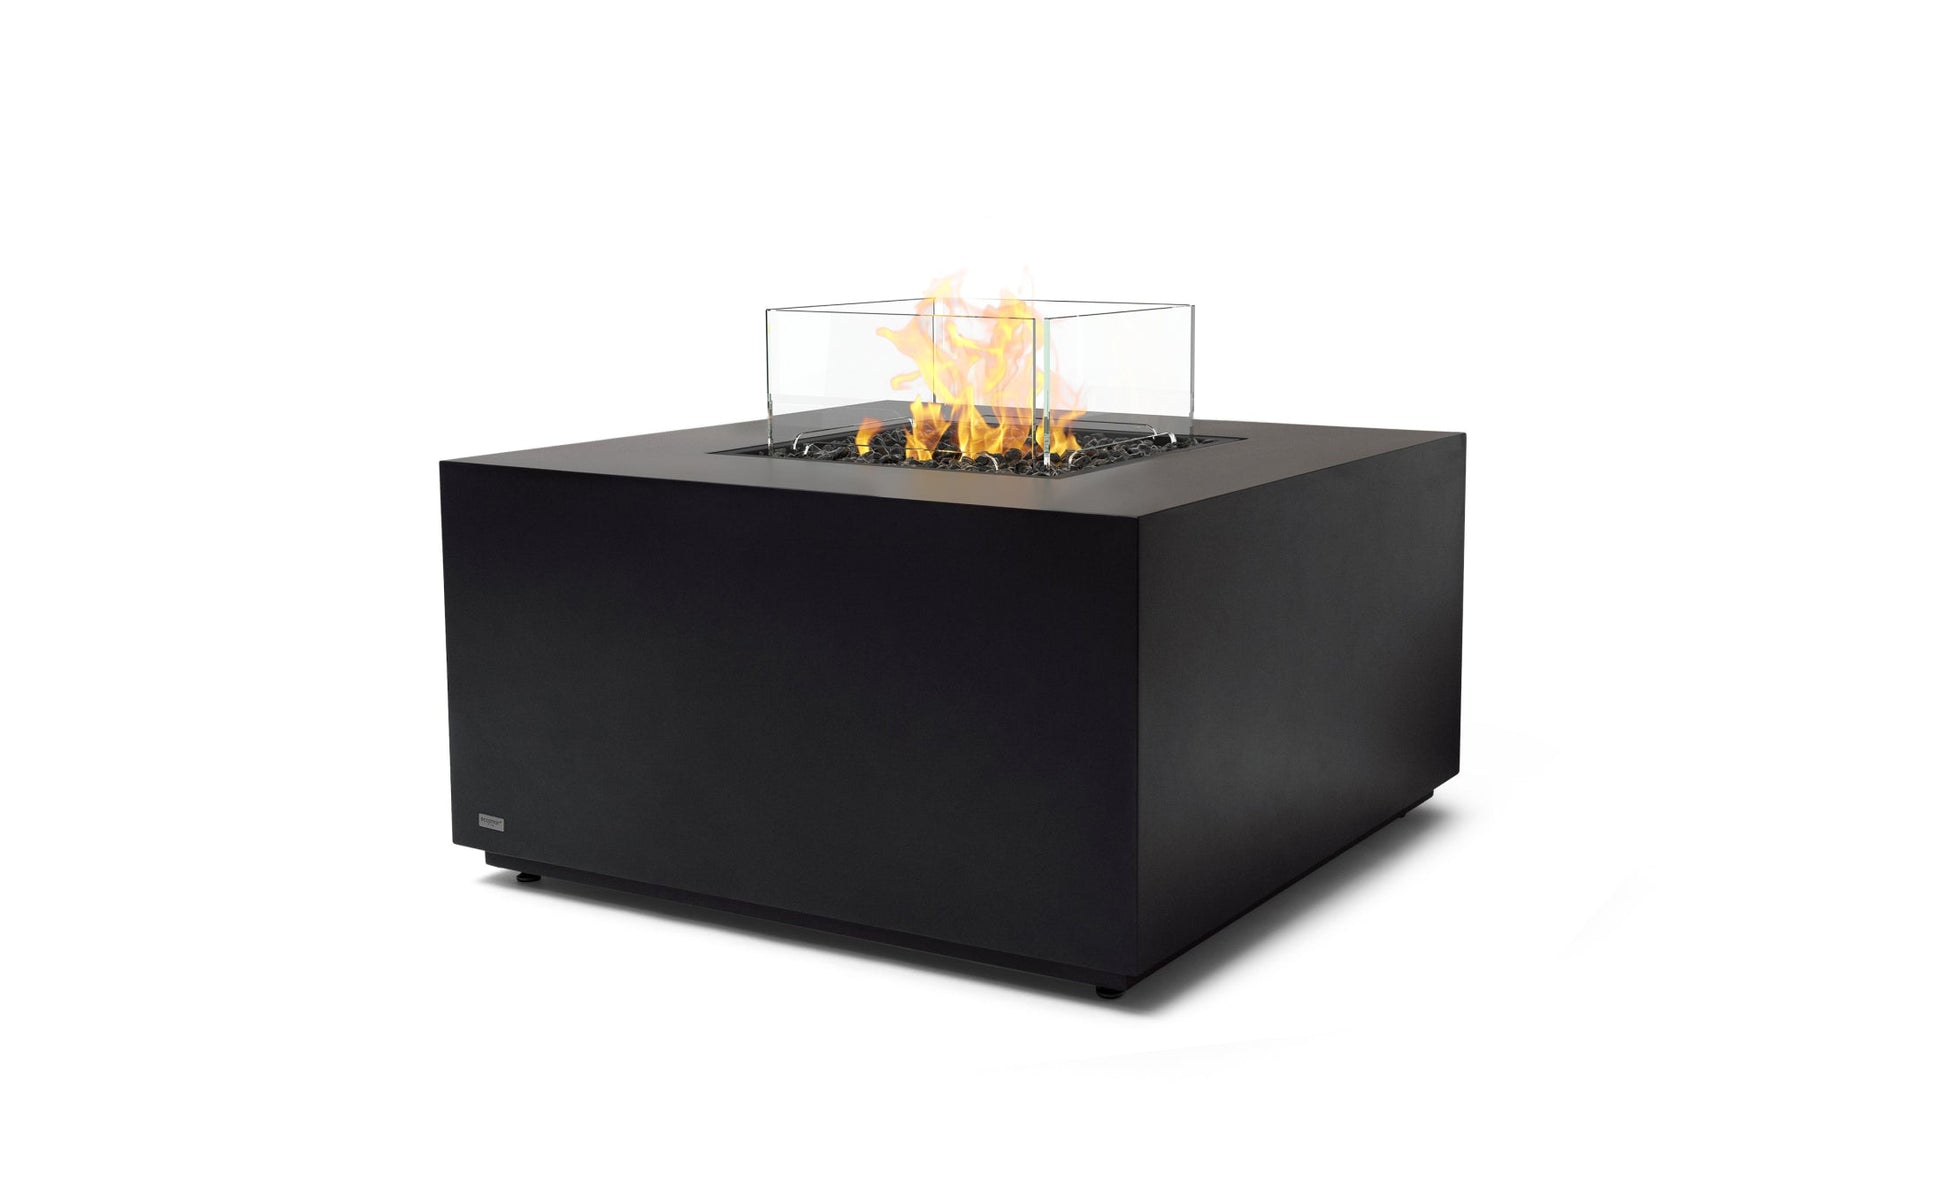 EcoSmart Fire CHASER 38" Graphite Outdoor Fire Pit Table with Gas LP/NG Burner by Mad Design Group